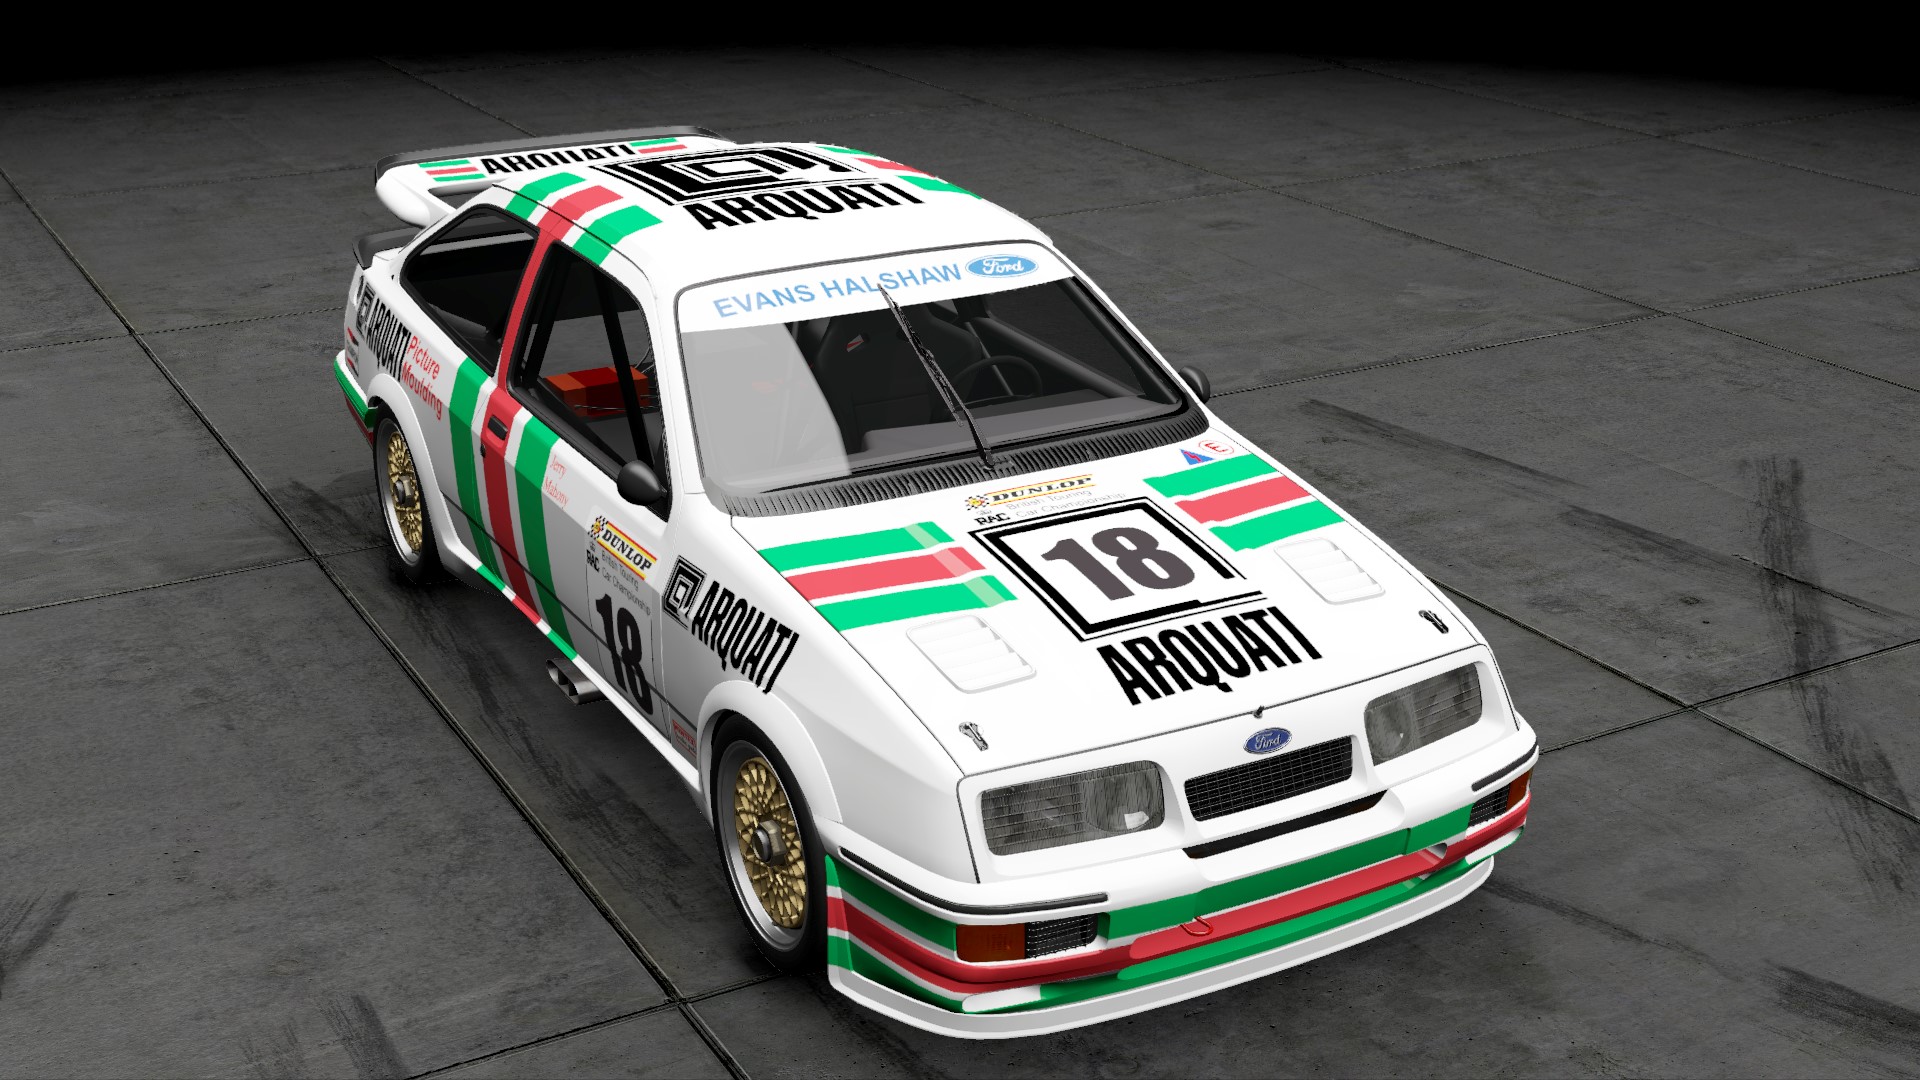 1987 Jerry Mahony BTCC Ford Sierra Cosworth – Project Cars 2